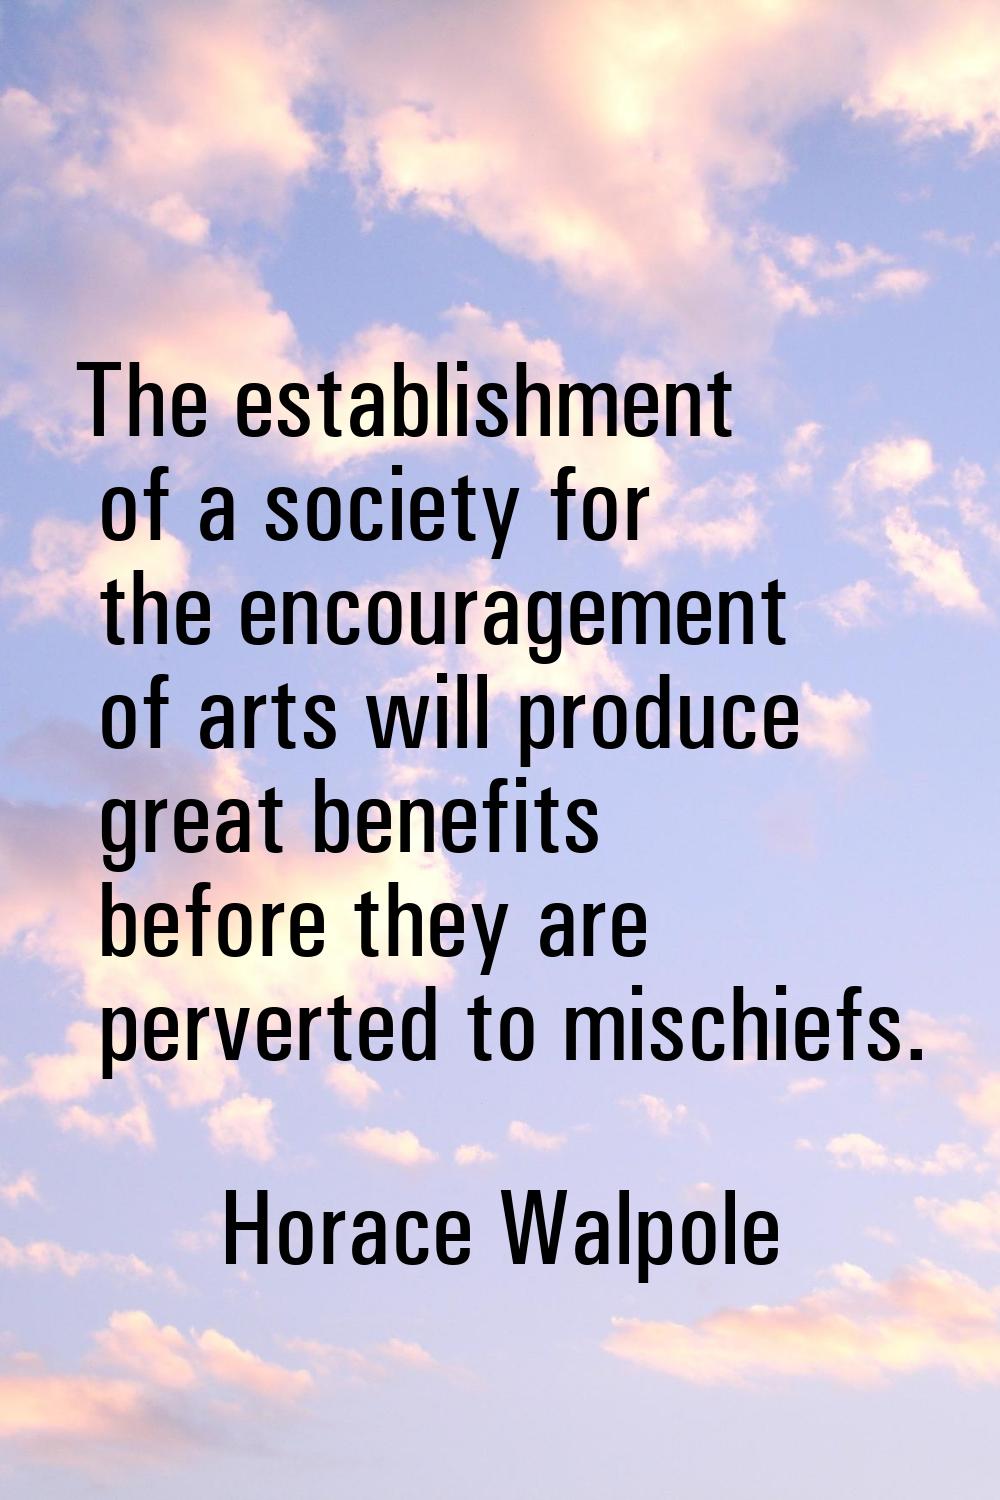 The establishment of a society for the encouragement of arts will produce great benefits before the